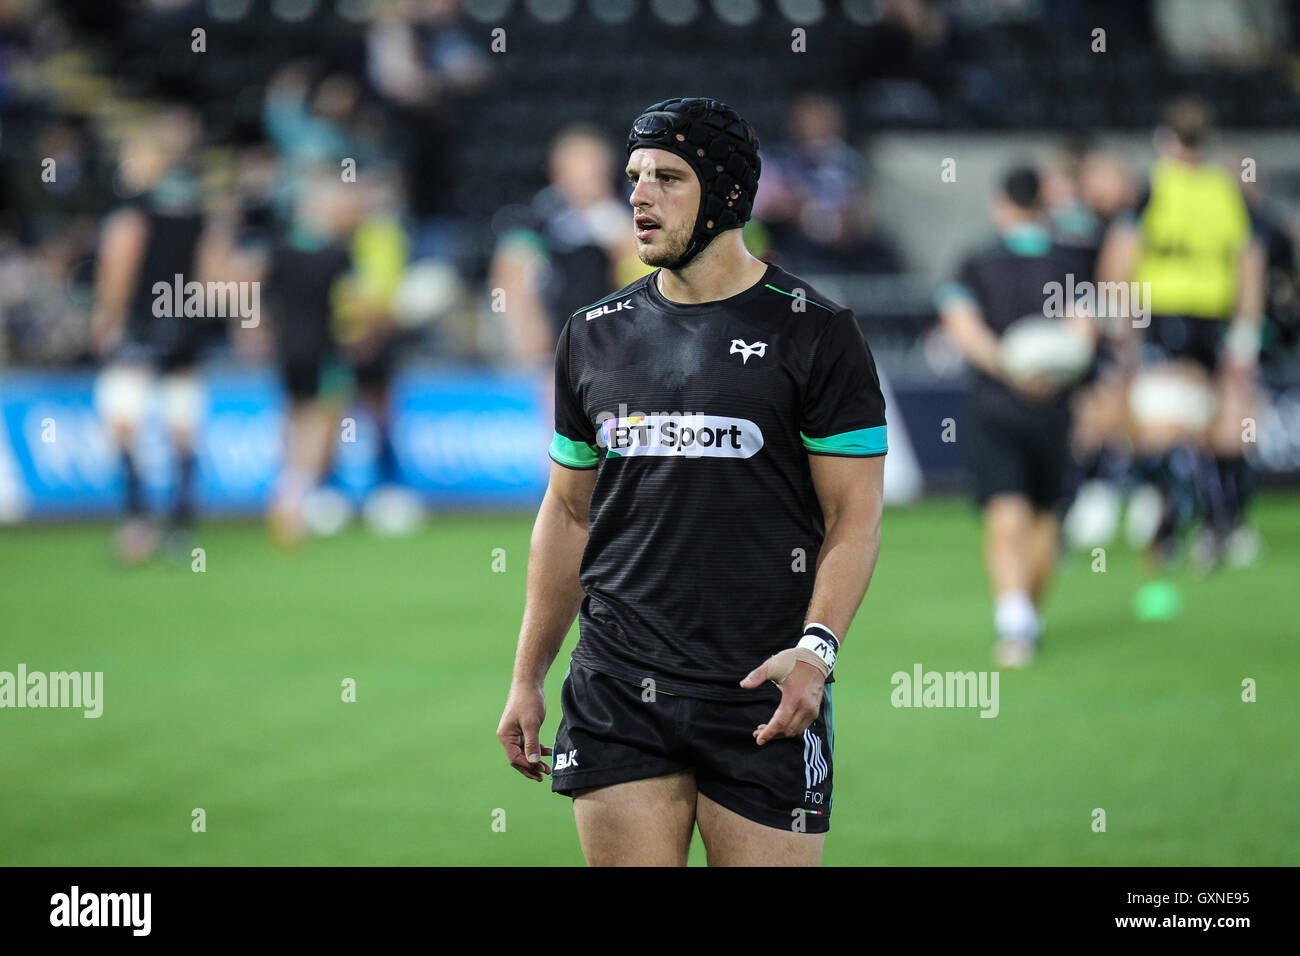 The Liberty Stadium, Swansea, Wales, UK. 17the September 2016. The Ospreys v Benetton Rugby (Treviso) in the Guinness Pro 12.  Copyright: Andrew Lewis/Alamy Live News Stock Photo